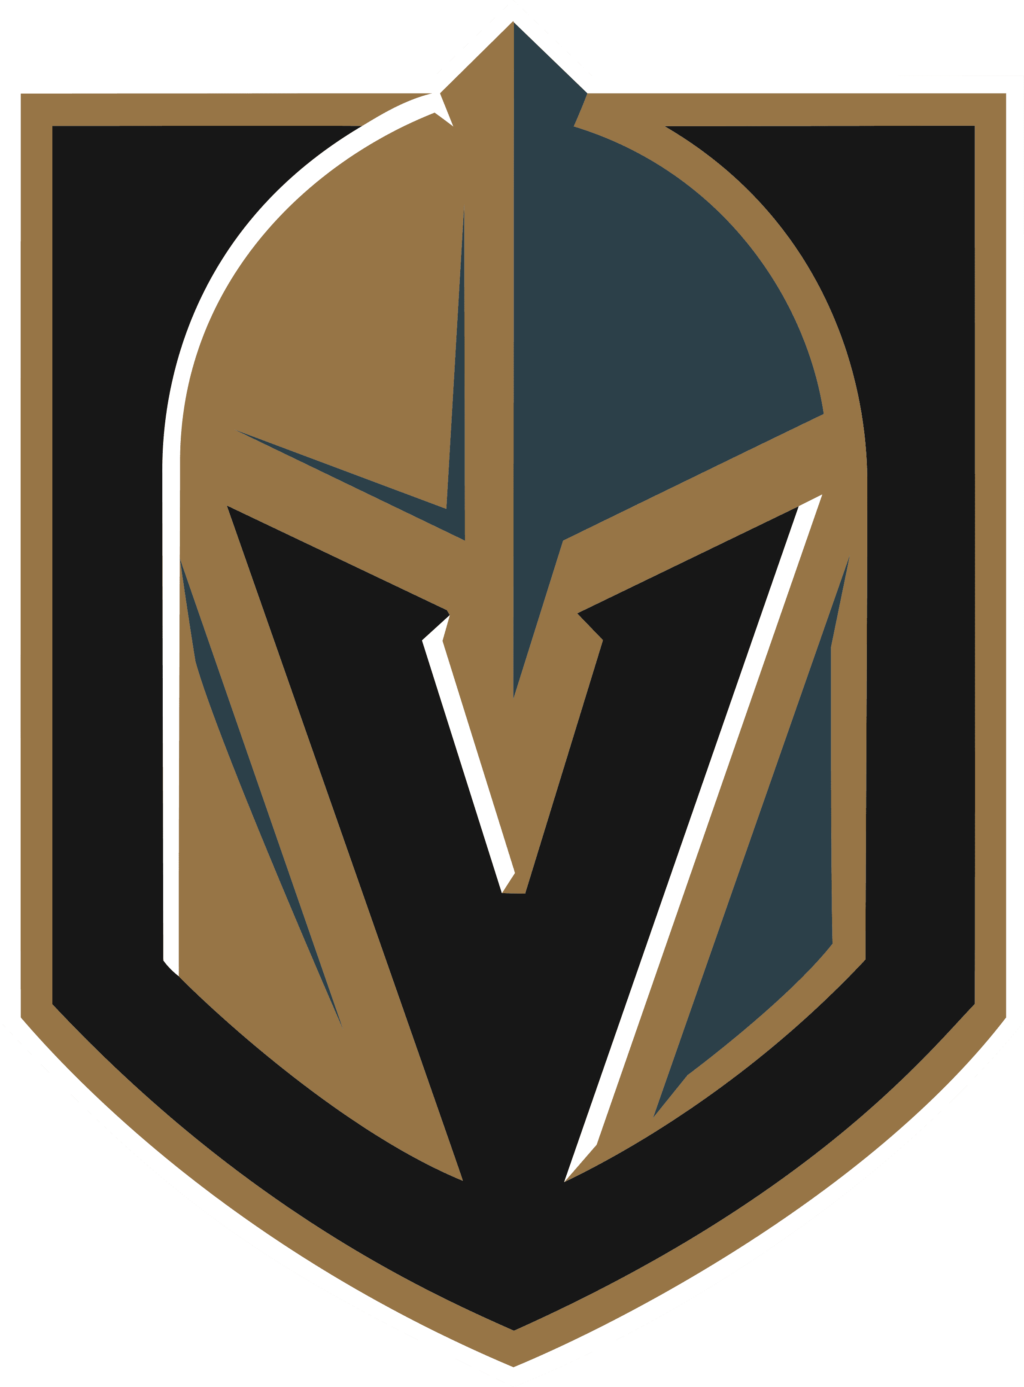 vgk 01 NHL Vegas Golden Knights, Vegas Golden Knights SVG Vector, Vegas Golden Knights Clipart, Vegas Golden Knights Ice Hockey Kit SVG, DXF, PNG, EPS Instant download NHL-Files for silhouette, files for clipping.